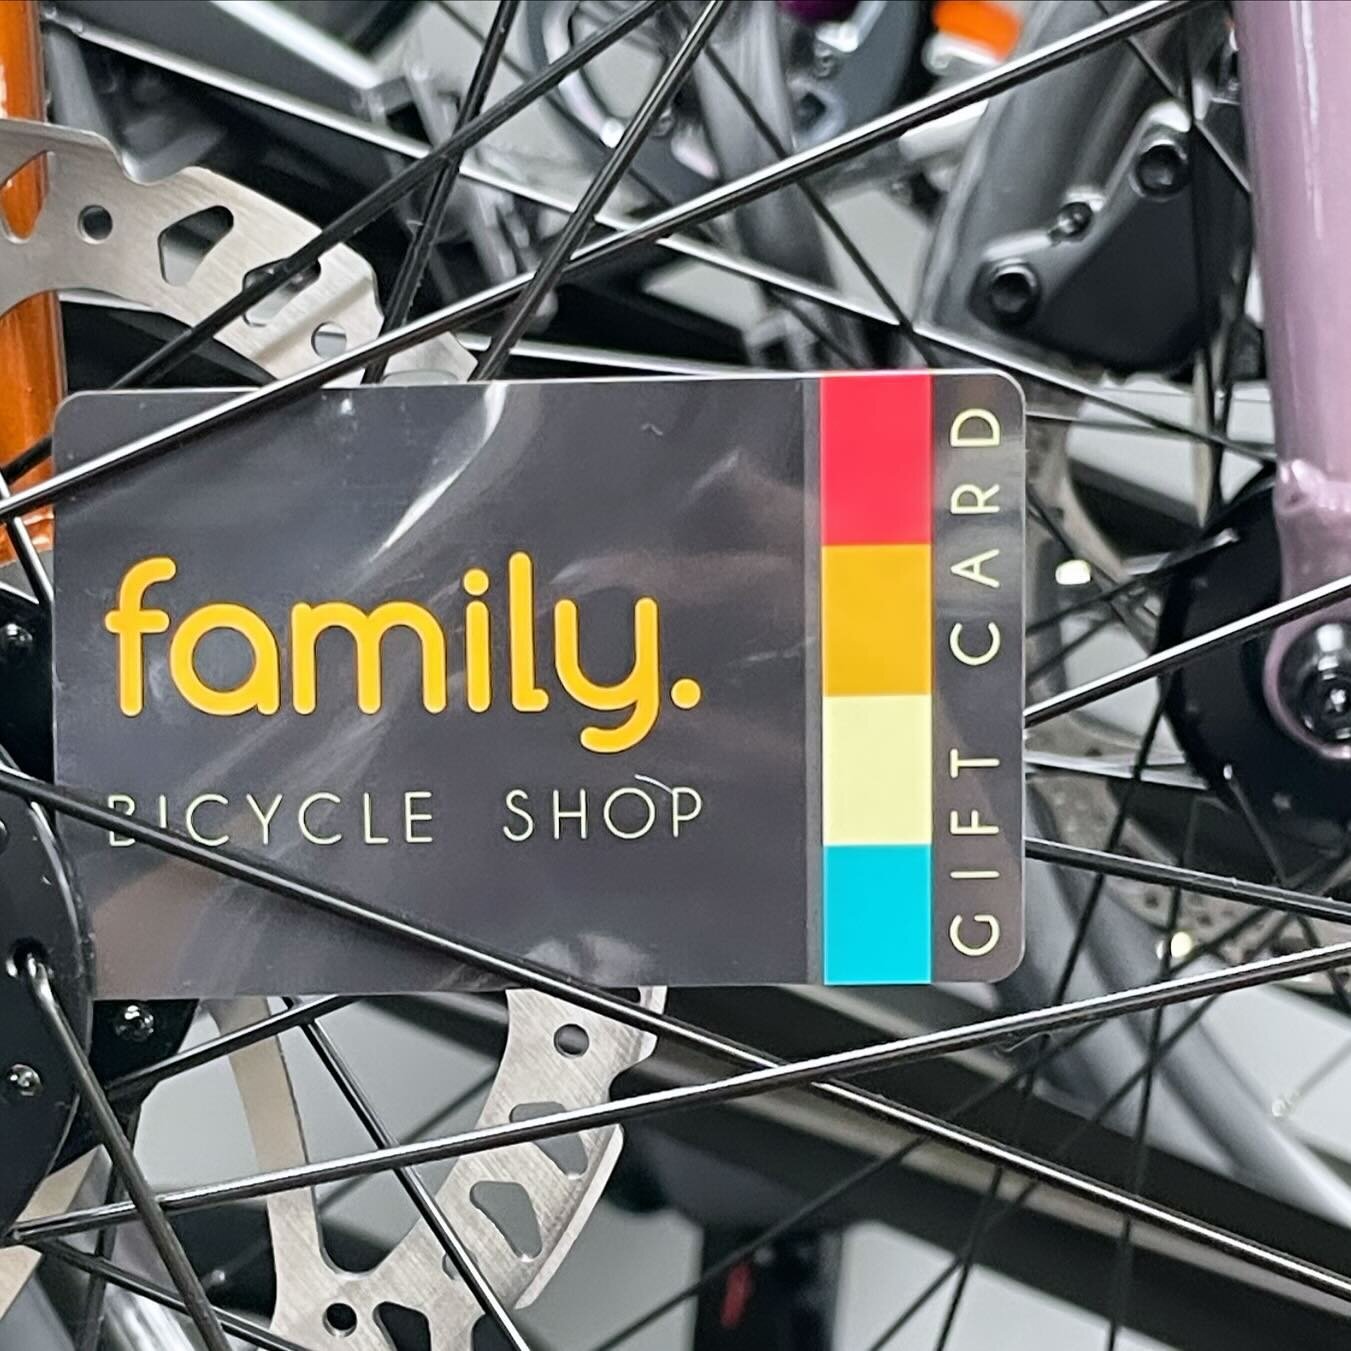 Gift cards are one size fits all! It&rsquo;s the perfect gift 🎁 #holiday #holidaygifts #familybike #familybicycle #familybicycleshop